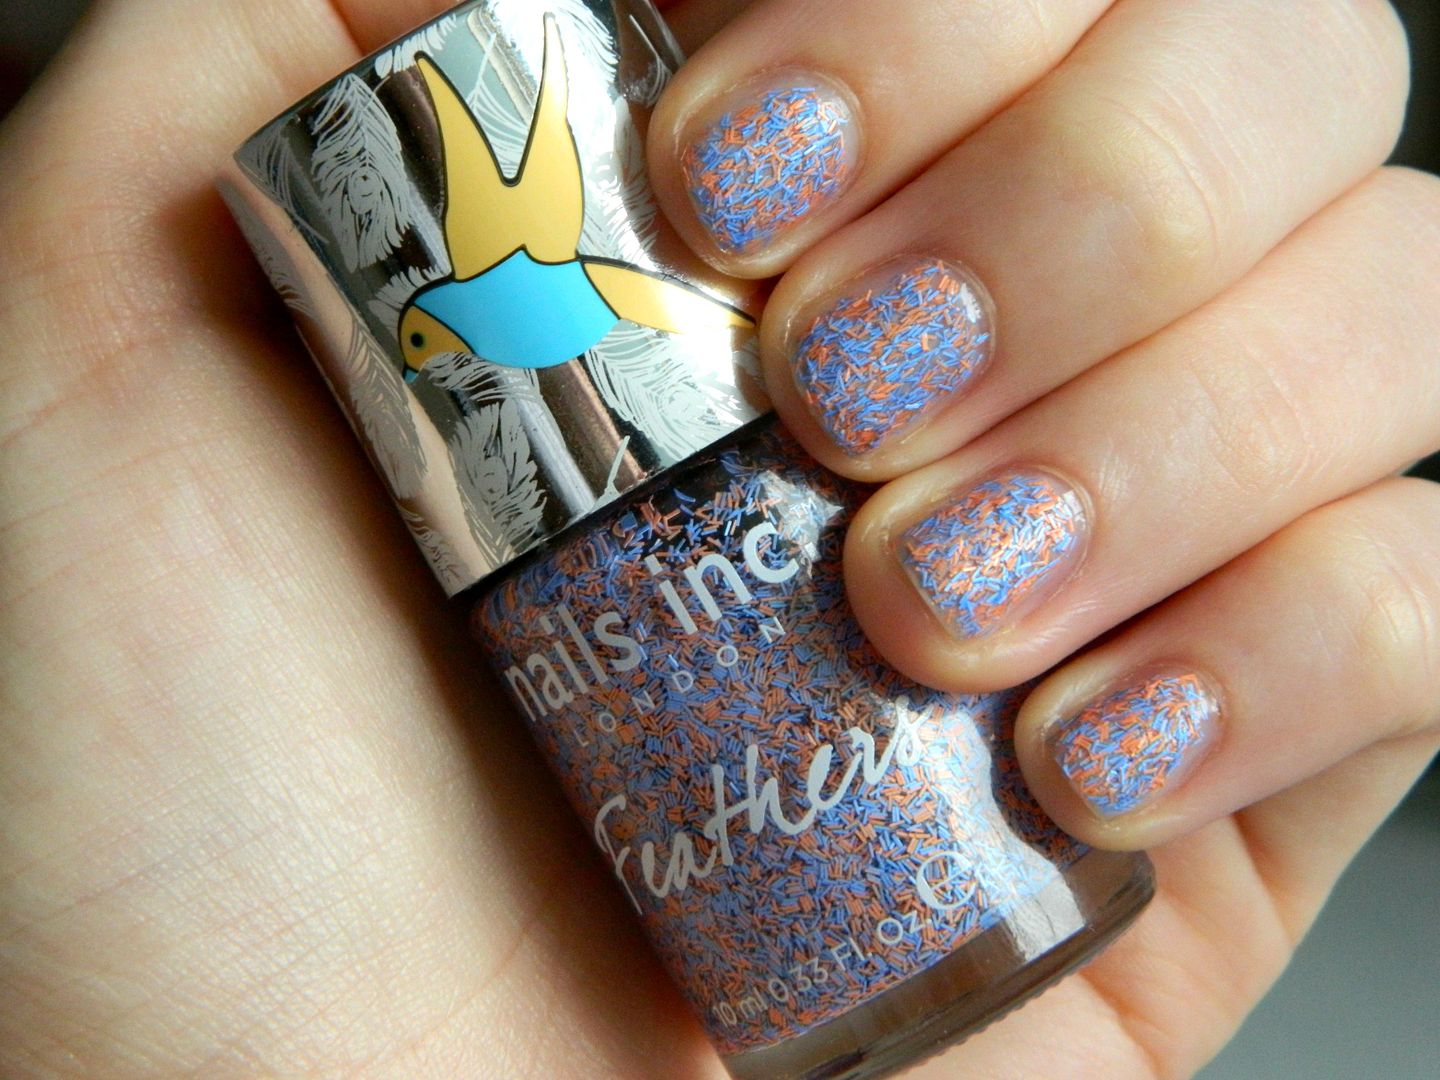 Nails Of the Day Nails Inc Feathers Edinburgh Nail Polish Swatch Review Belle-amie